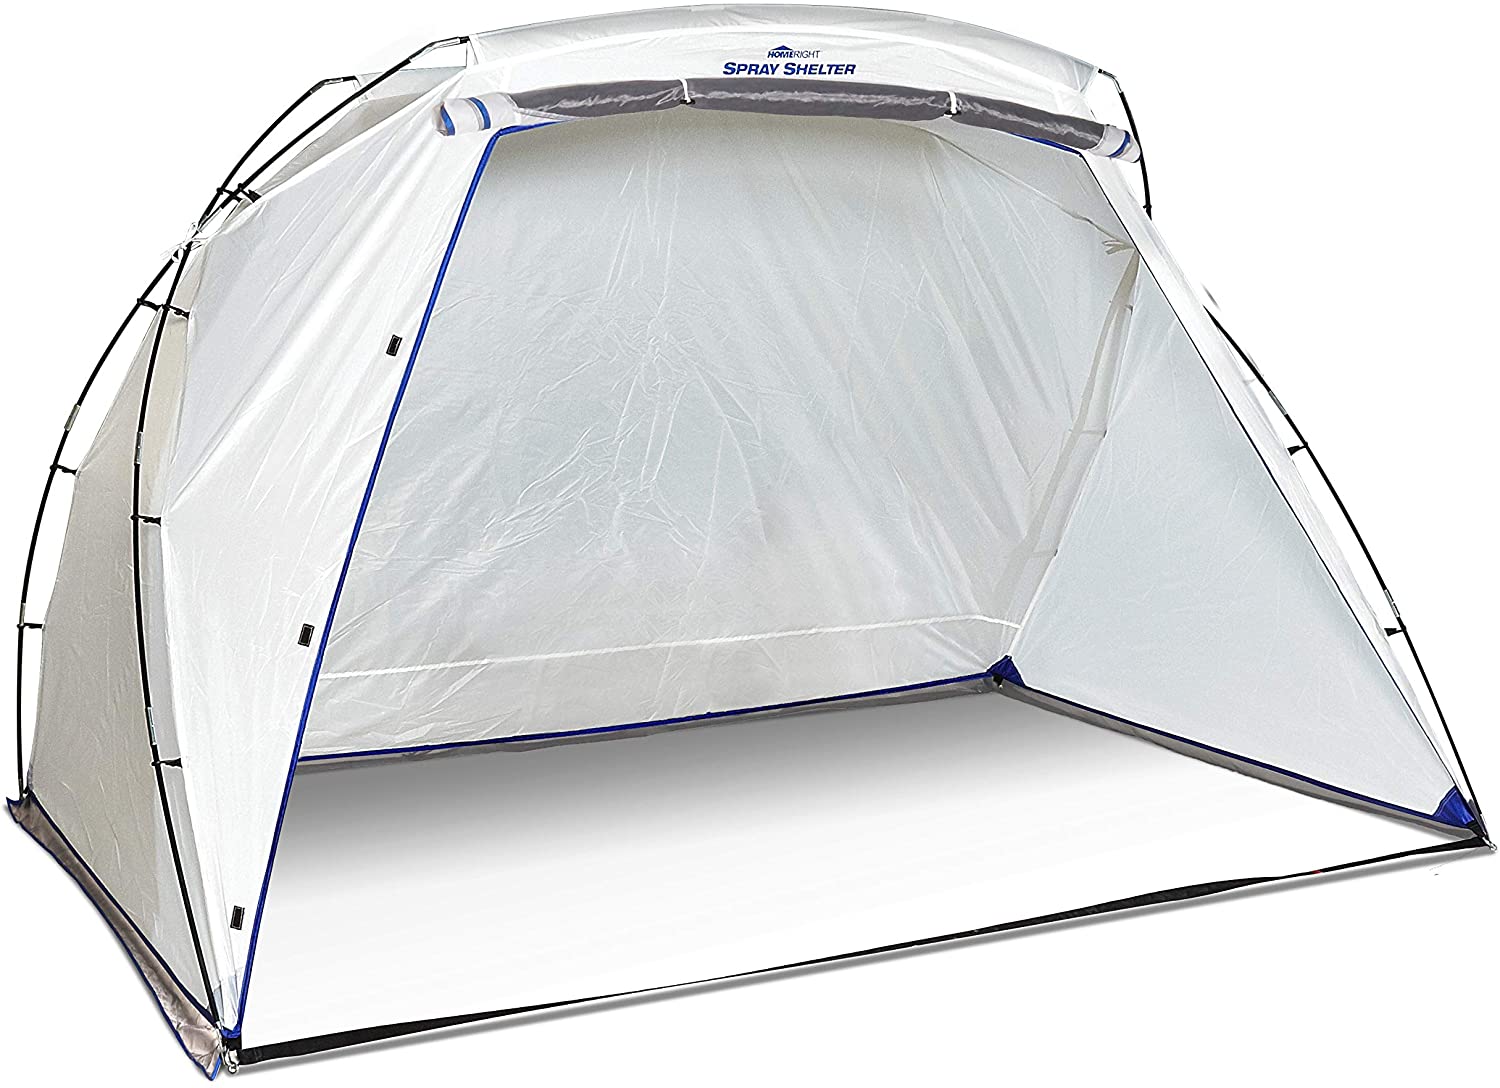 HomeRight Spray Shelter With Bag Collapsible Tent Poles